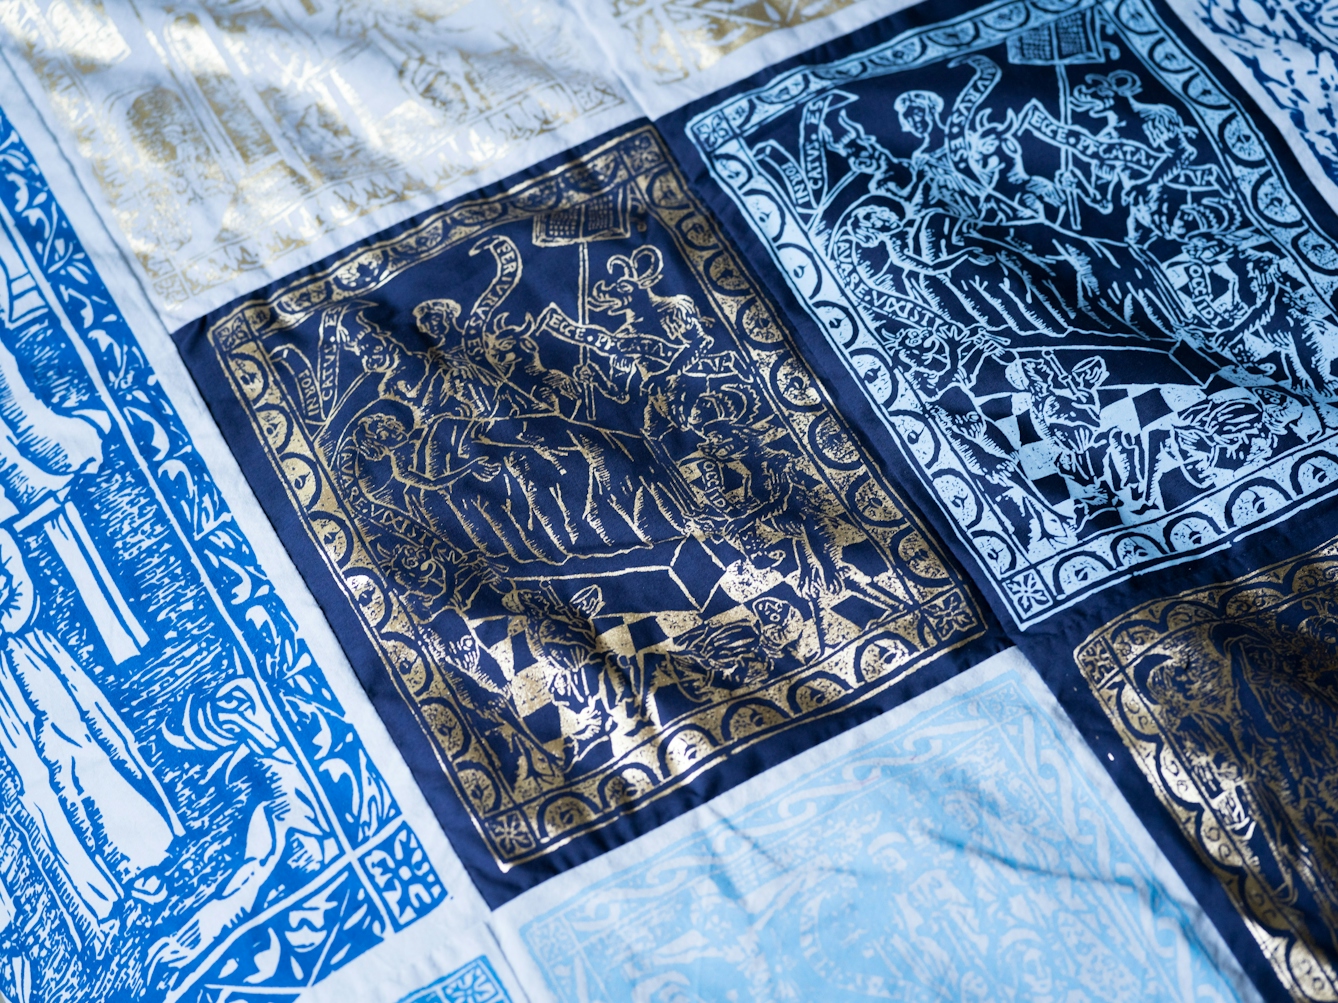 Photograph of a close up of a duvet cover which is made of a patchwork of blue, silver and gold screen-printed designs. 